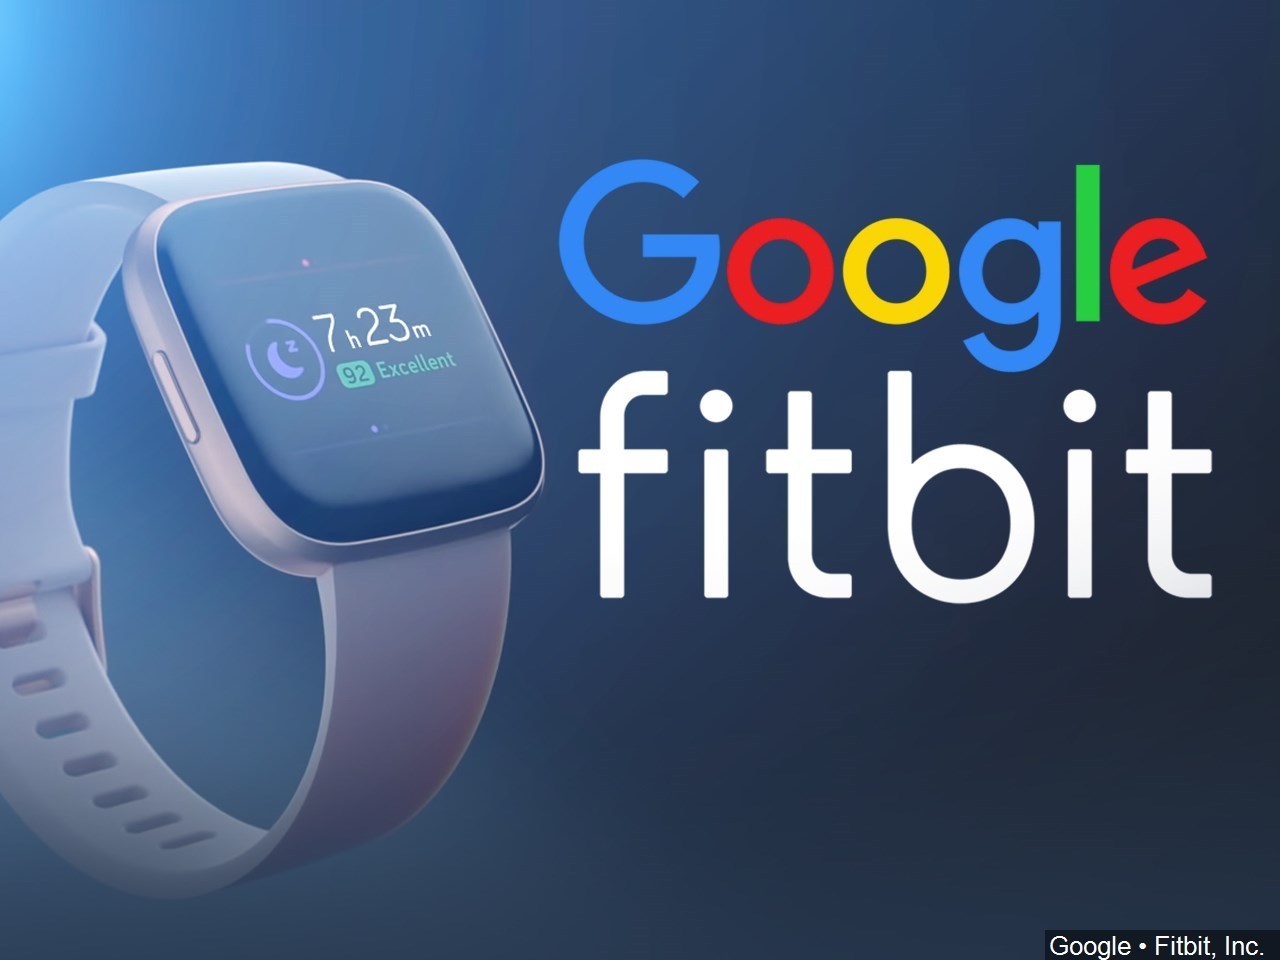 Fitbit, the Smartwatch maker, acquired by Google for $2.1B